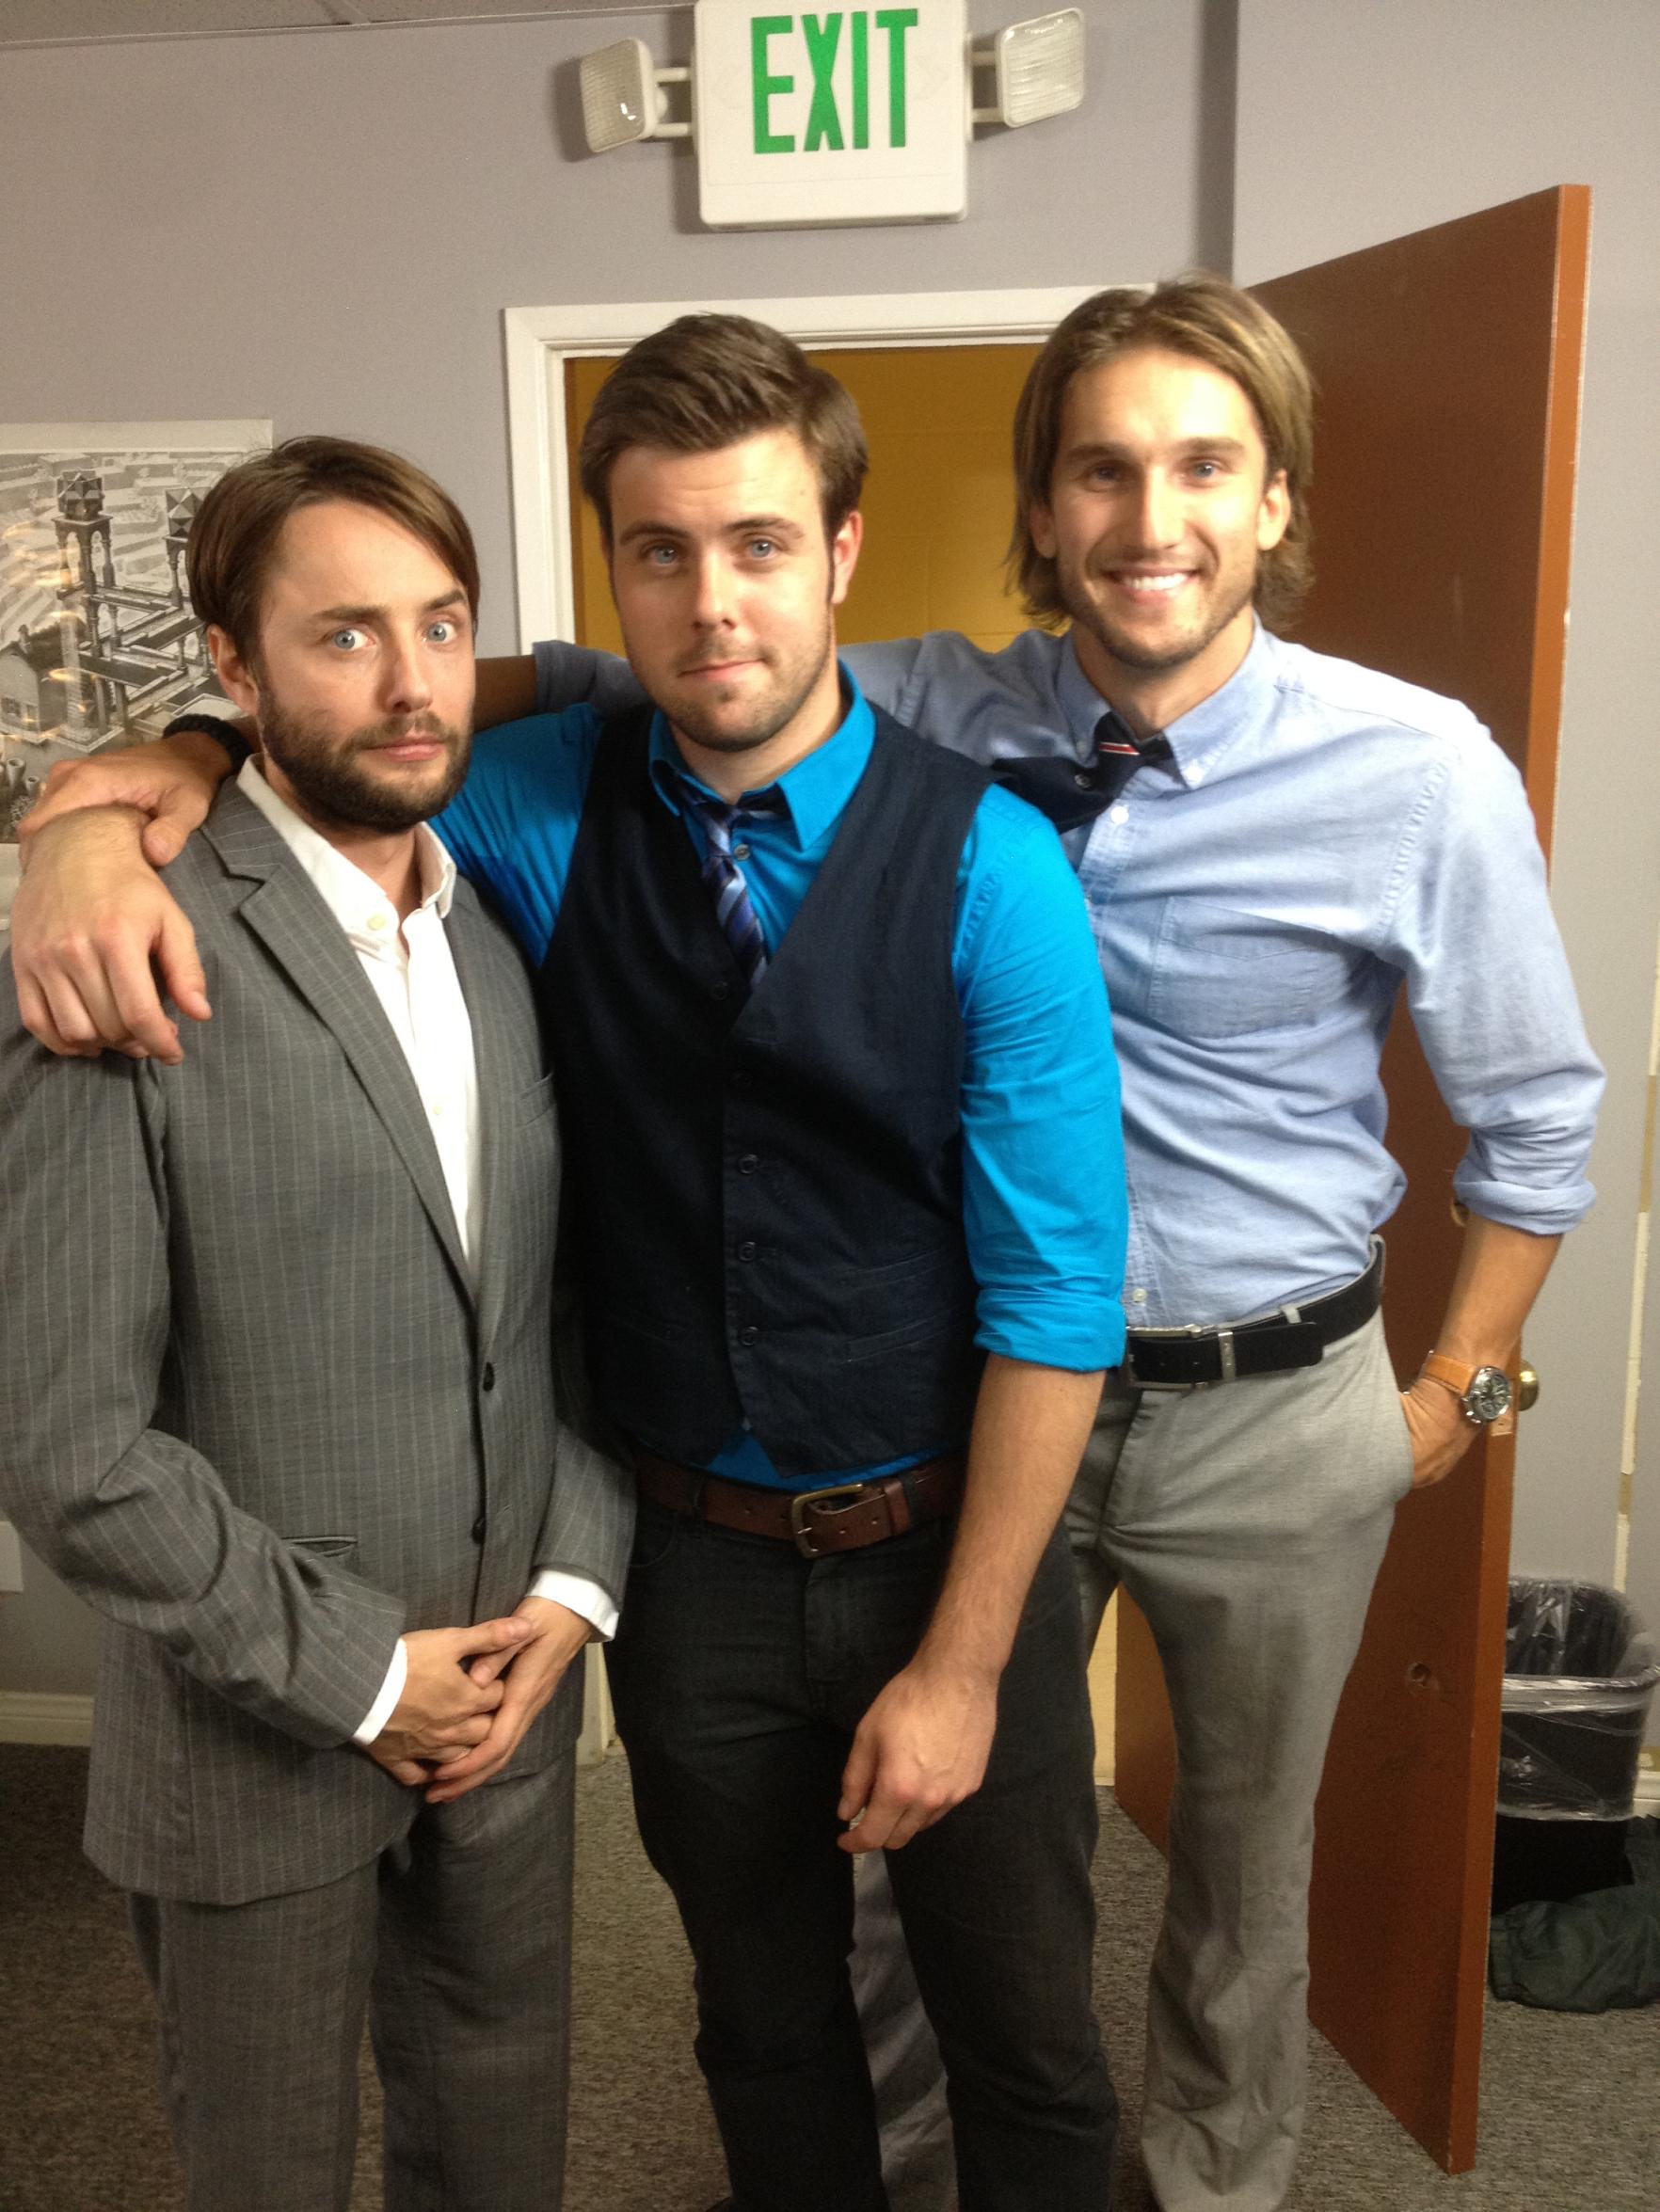 Vincent Kartheiser, Robert Hardin and Landon Ashworth on the set of Cussing In The Workplace.